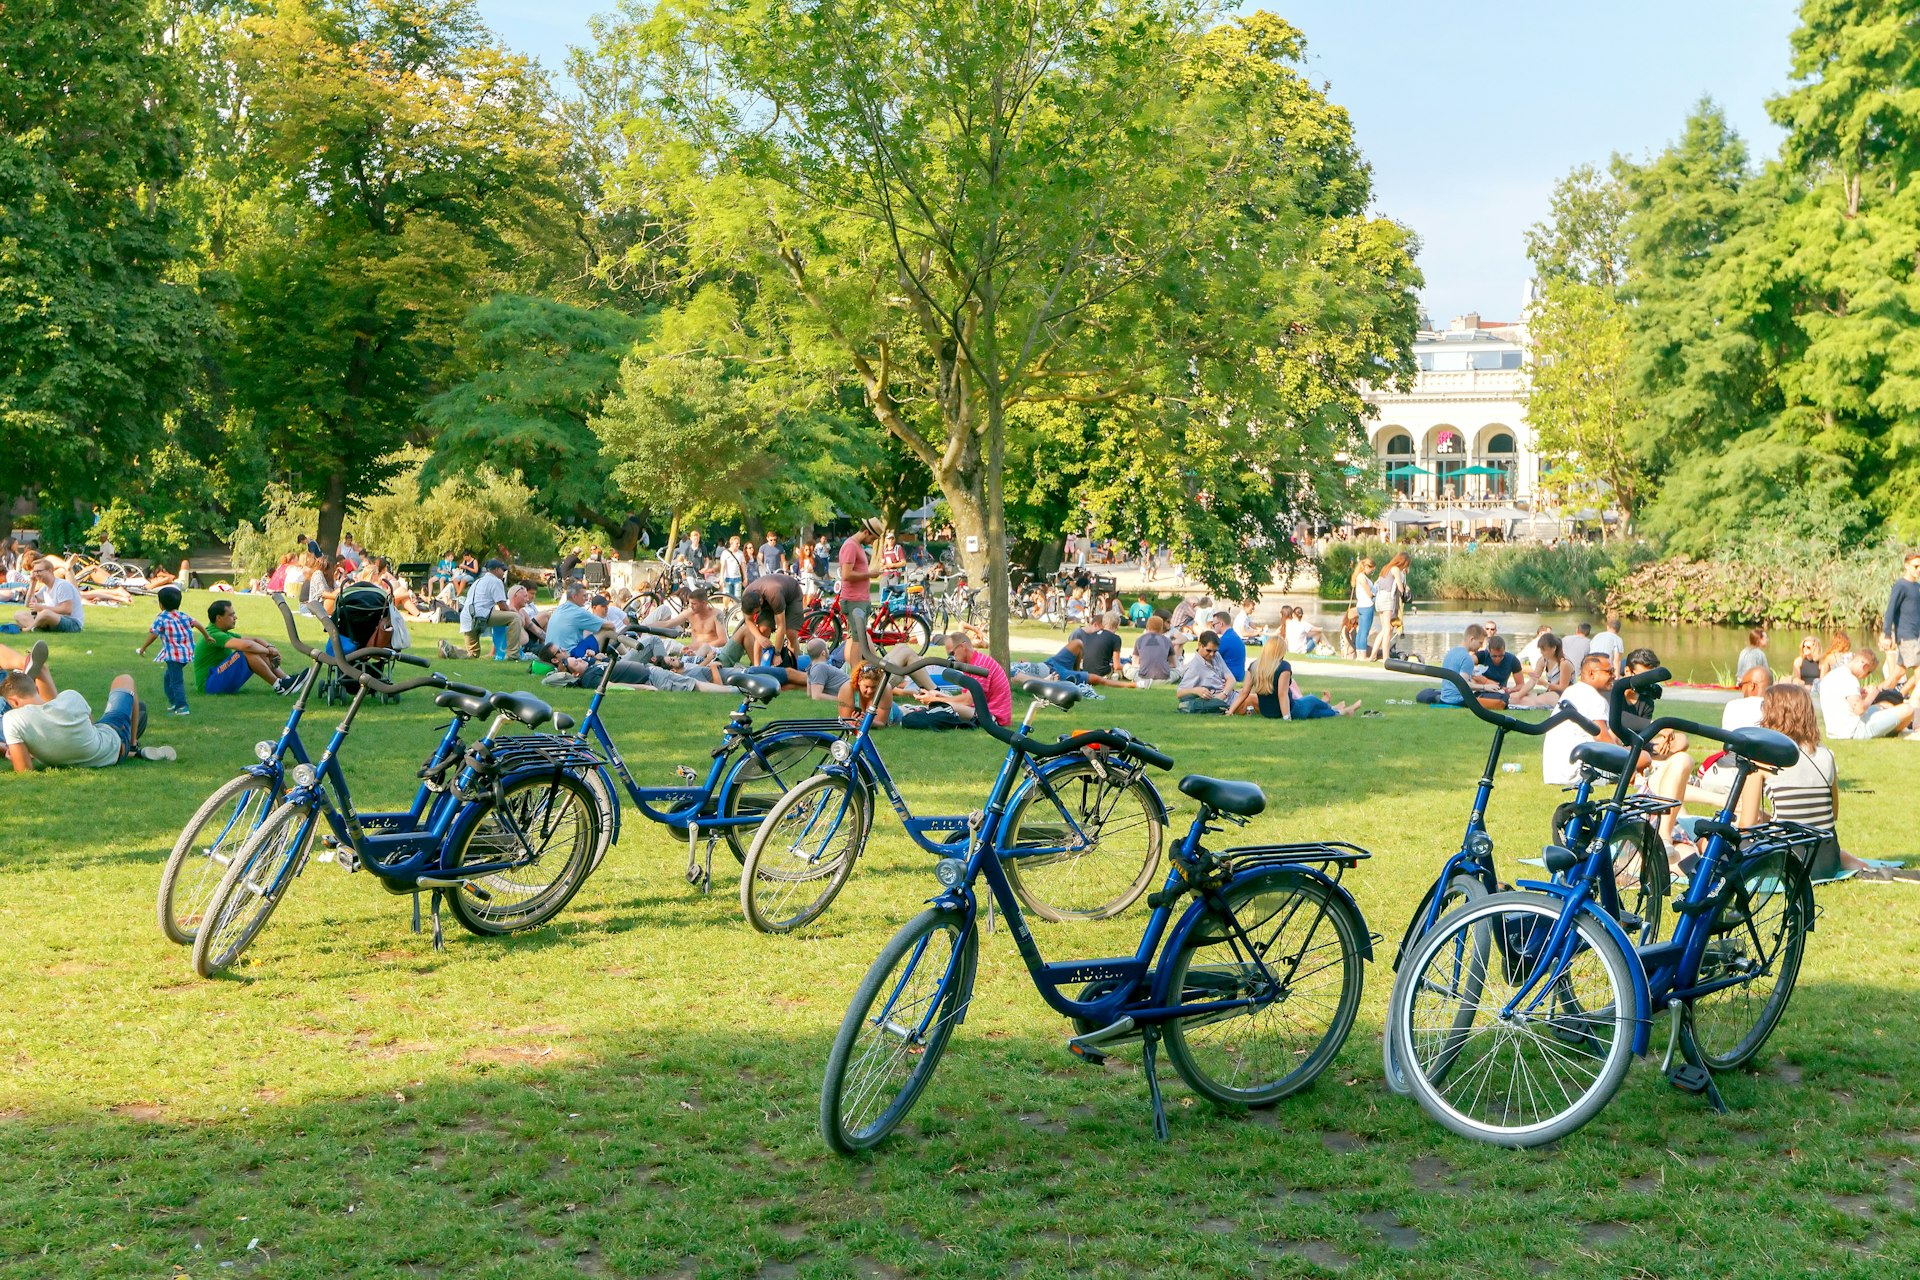 Groups of people sat on a lawn in a park with bicycles standing up nearby